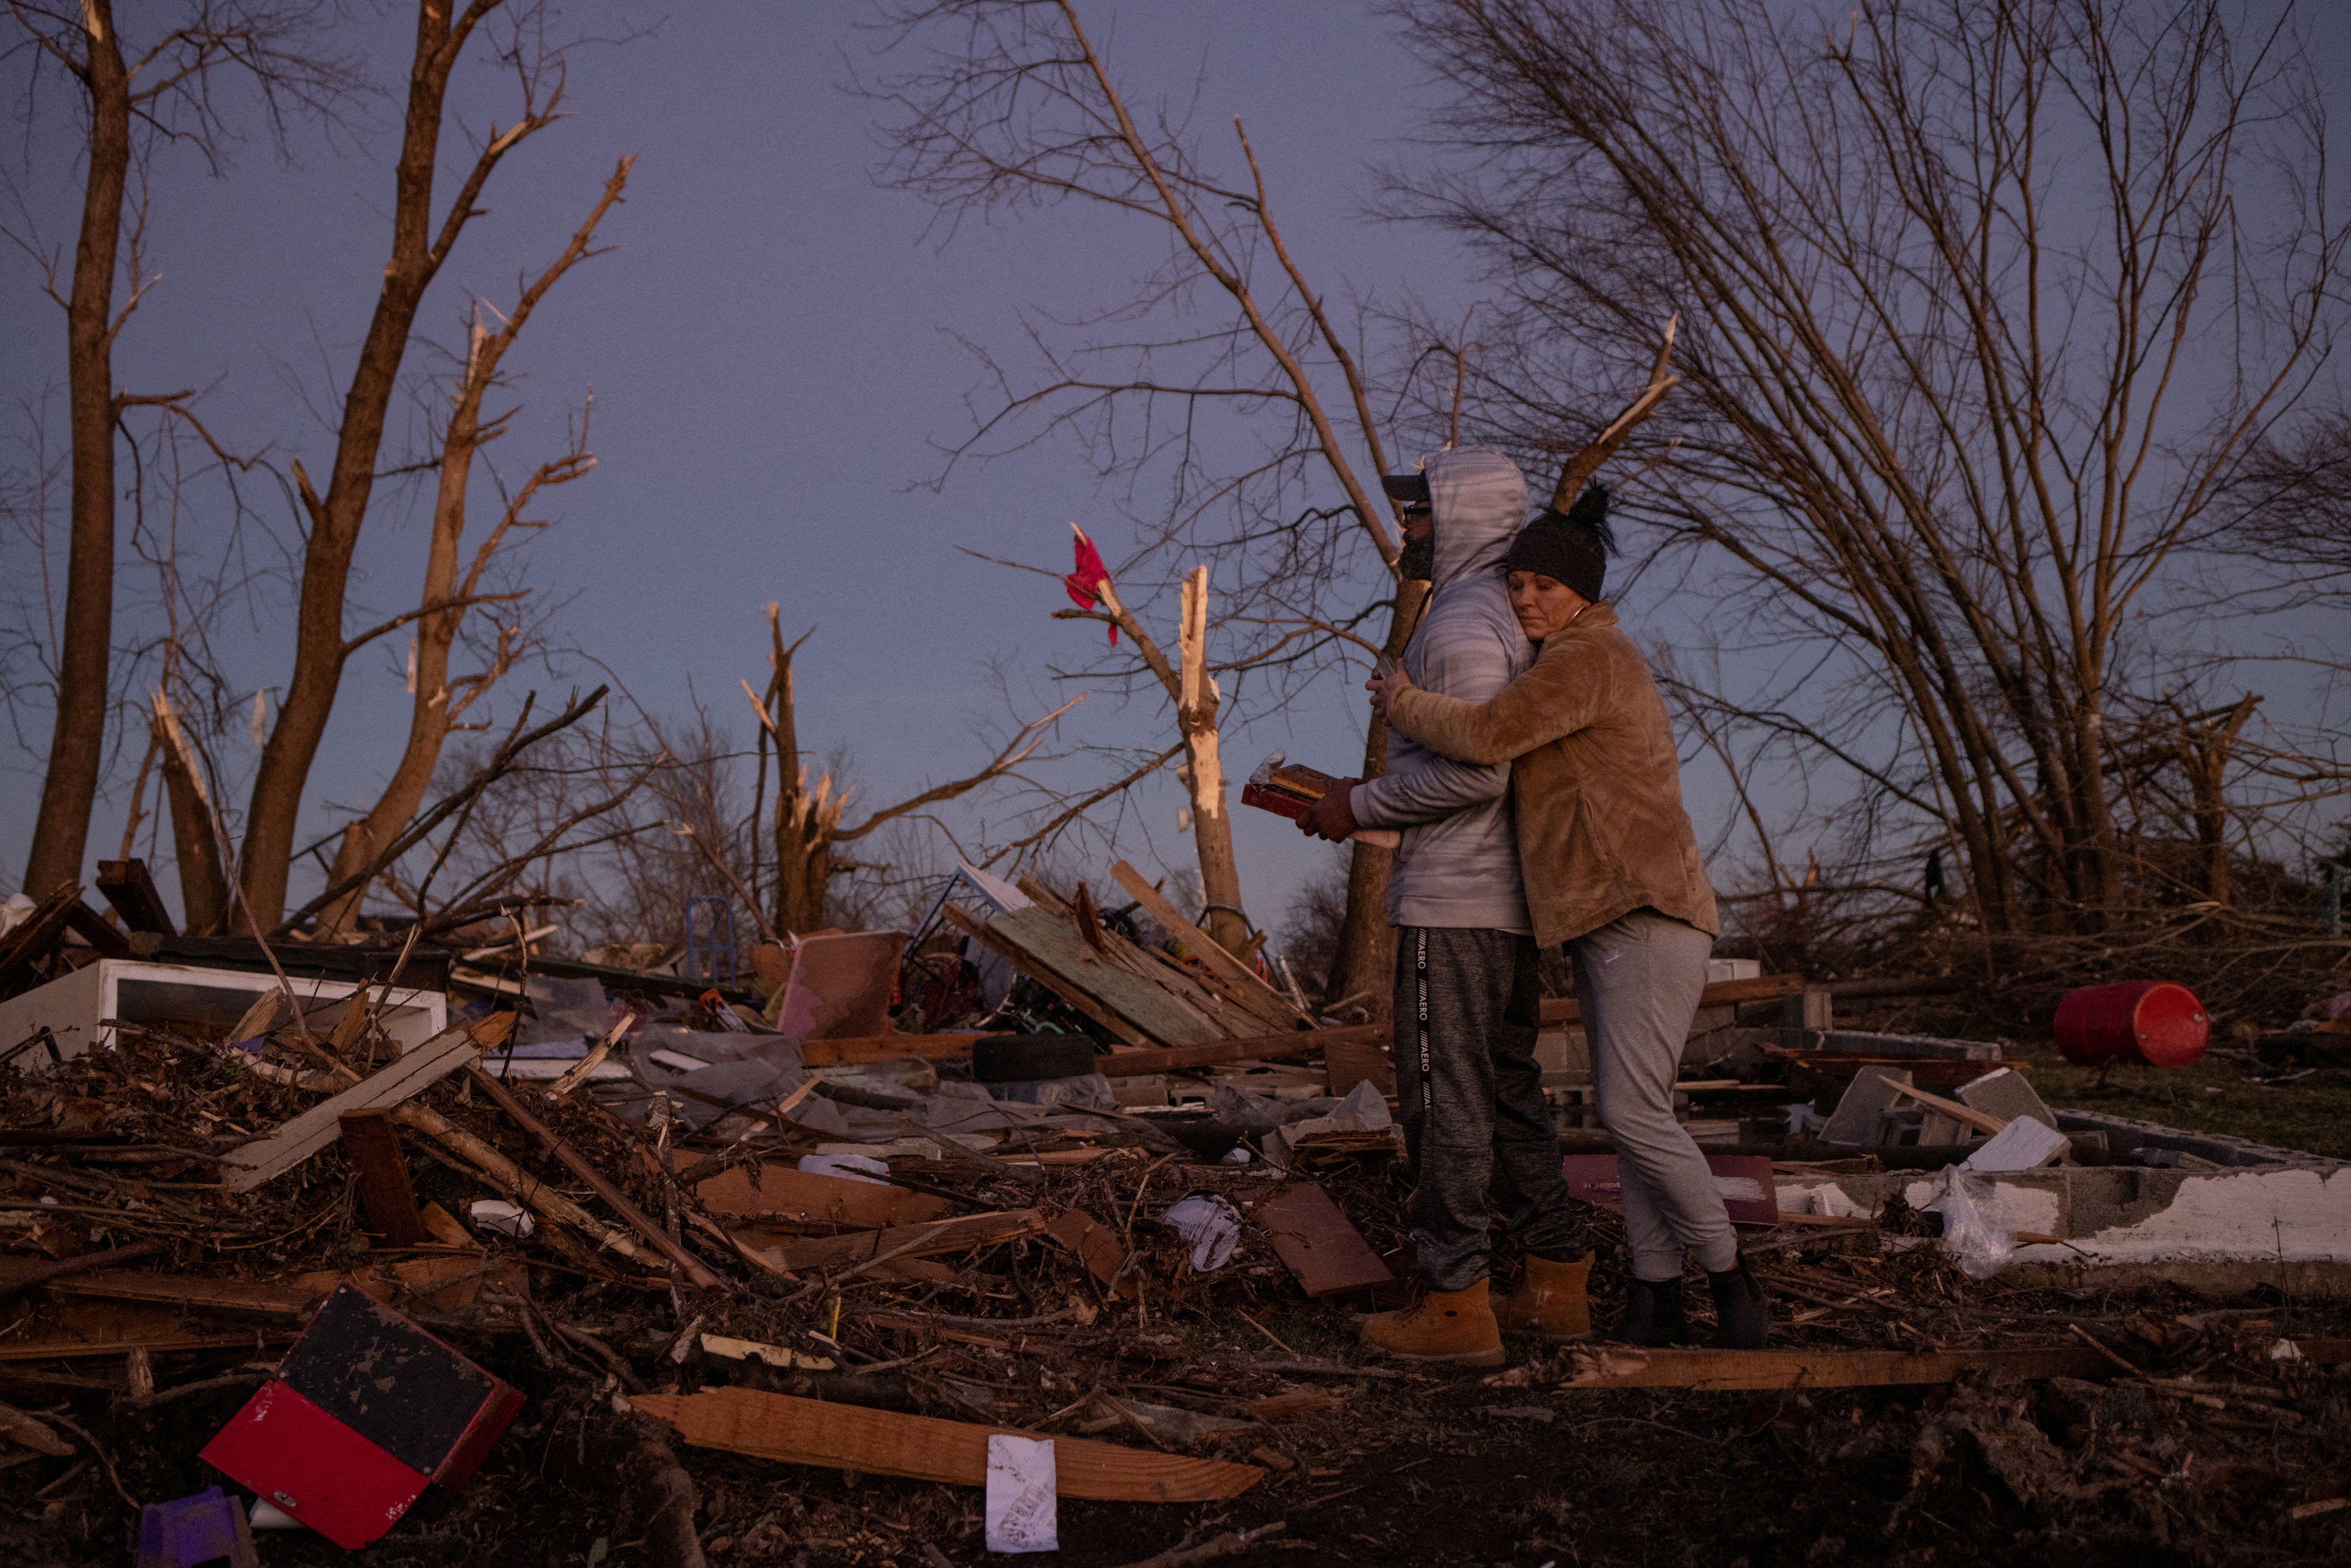 Devastating outbreak of tornadoes that ripped through several U.S. states